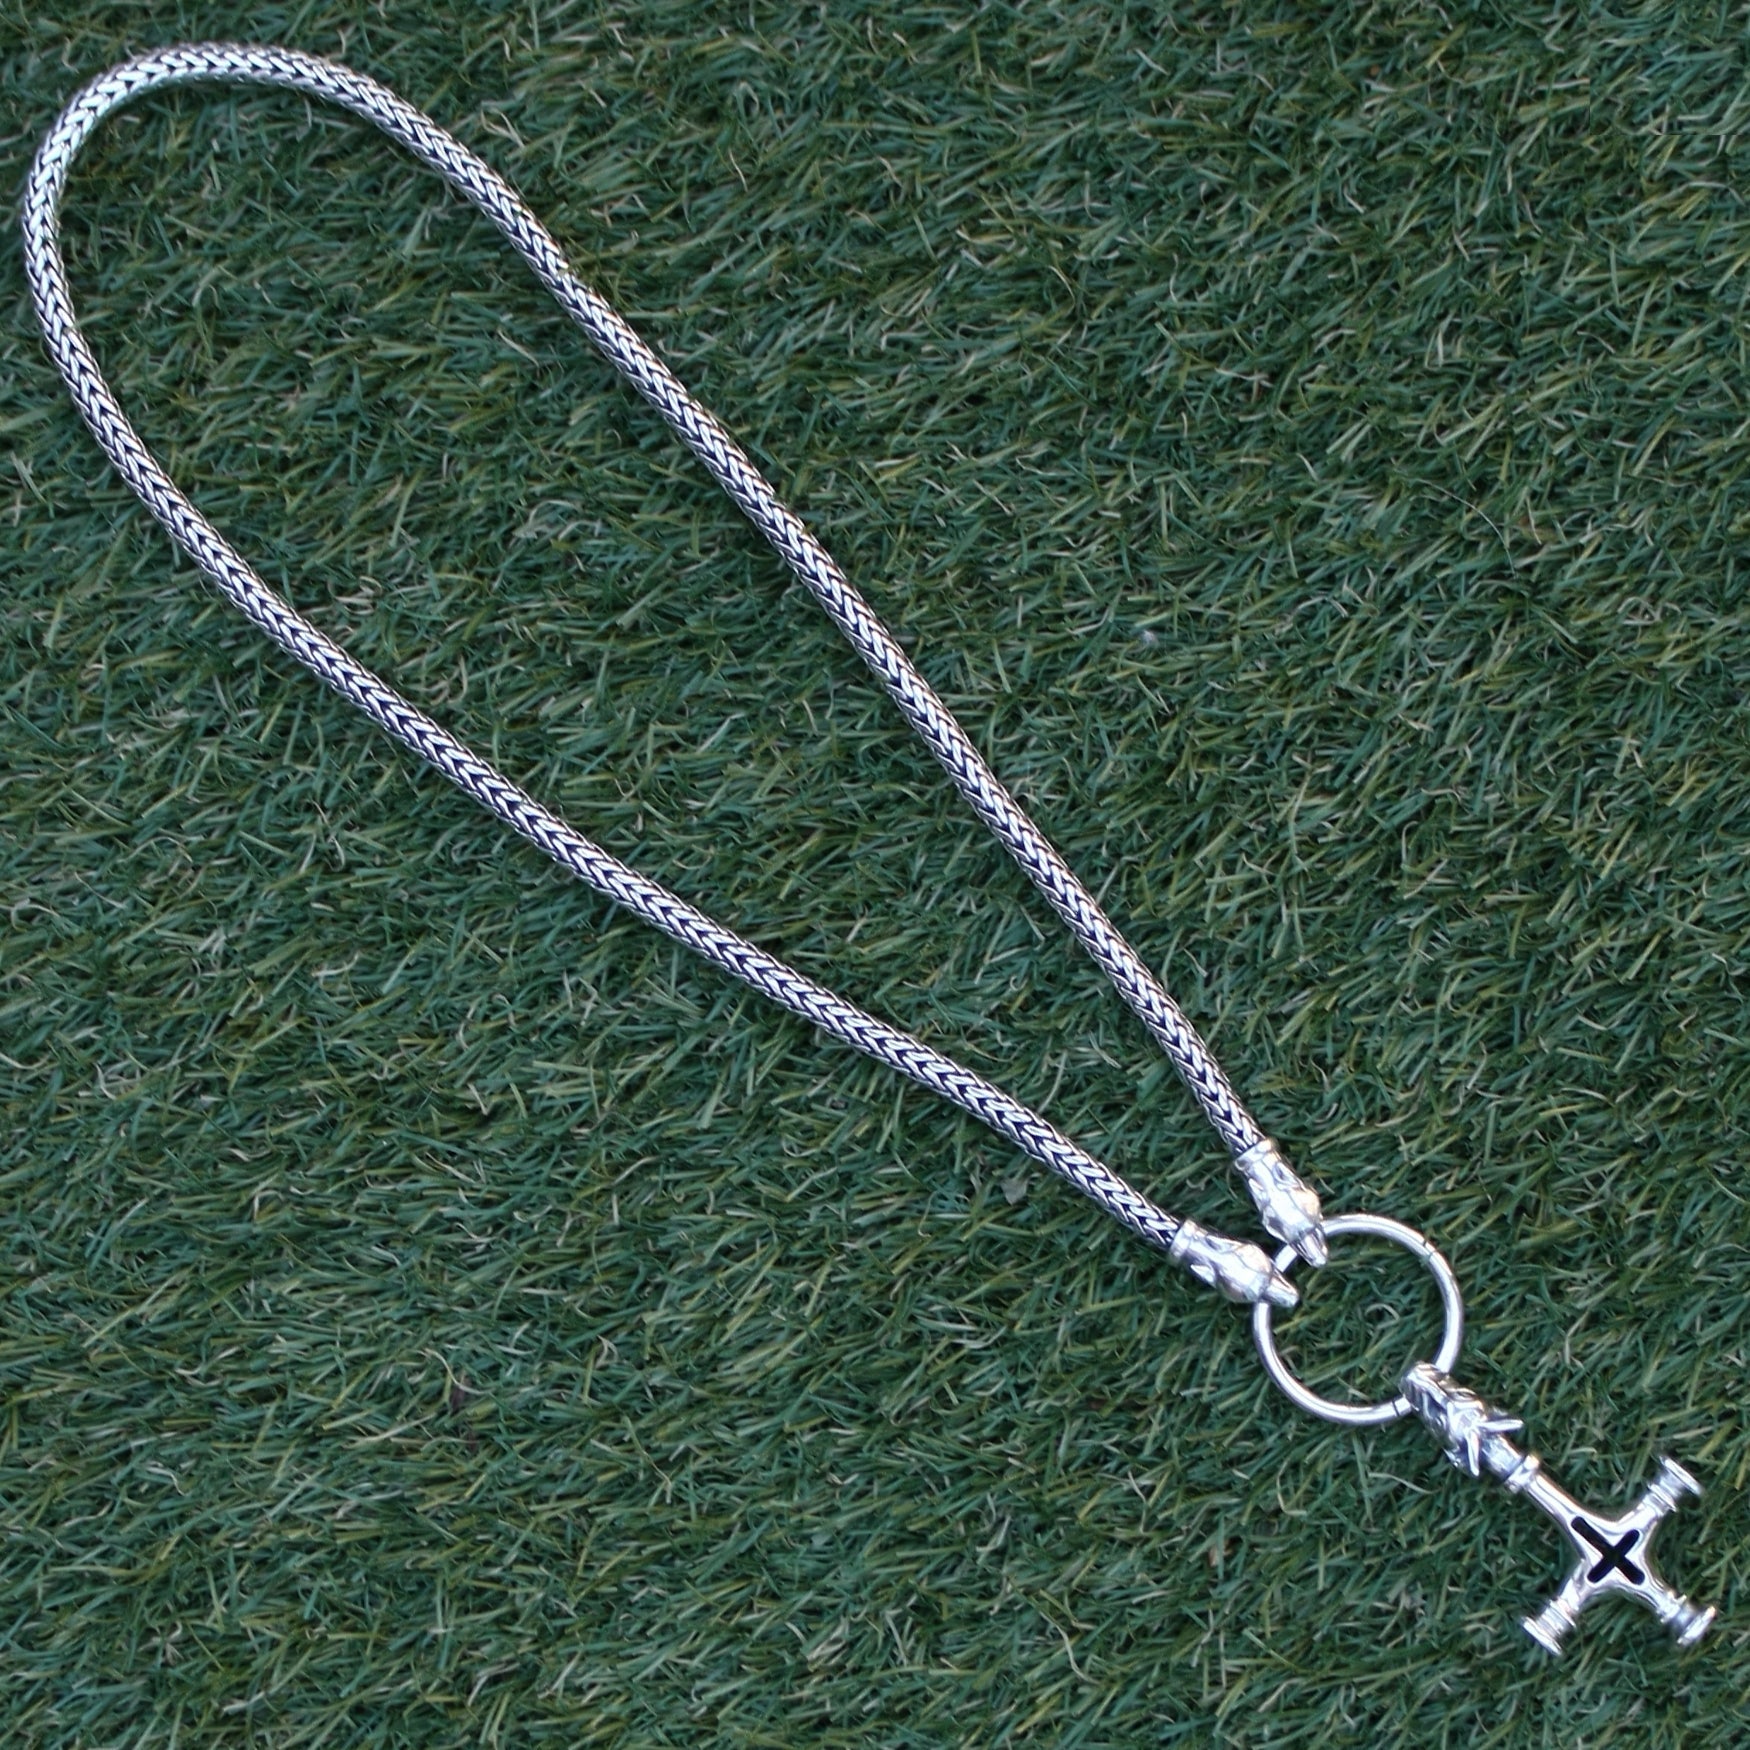 Silver Thor's Hammer Necklace with Ferocious Wolf Heads and Large Icelandic Thor's Hammer onm Grass - Viking Jewelry